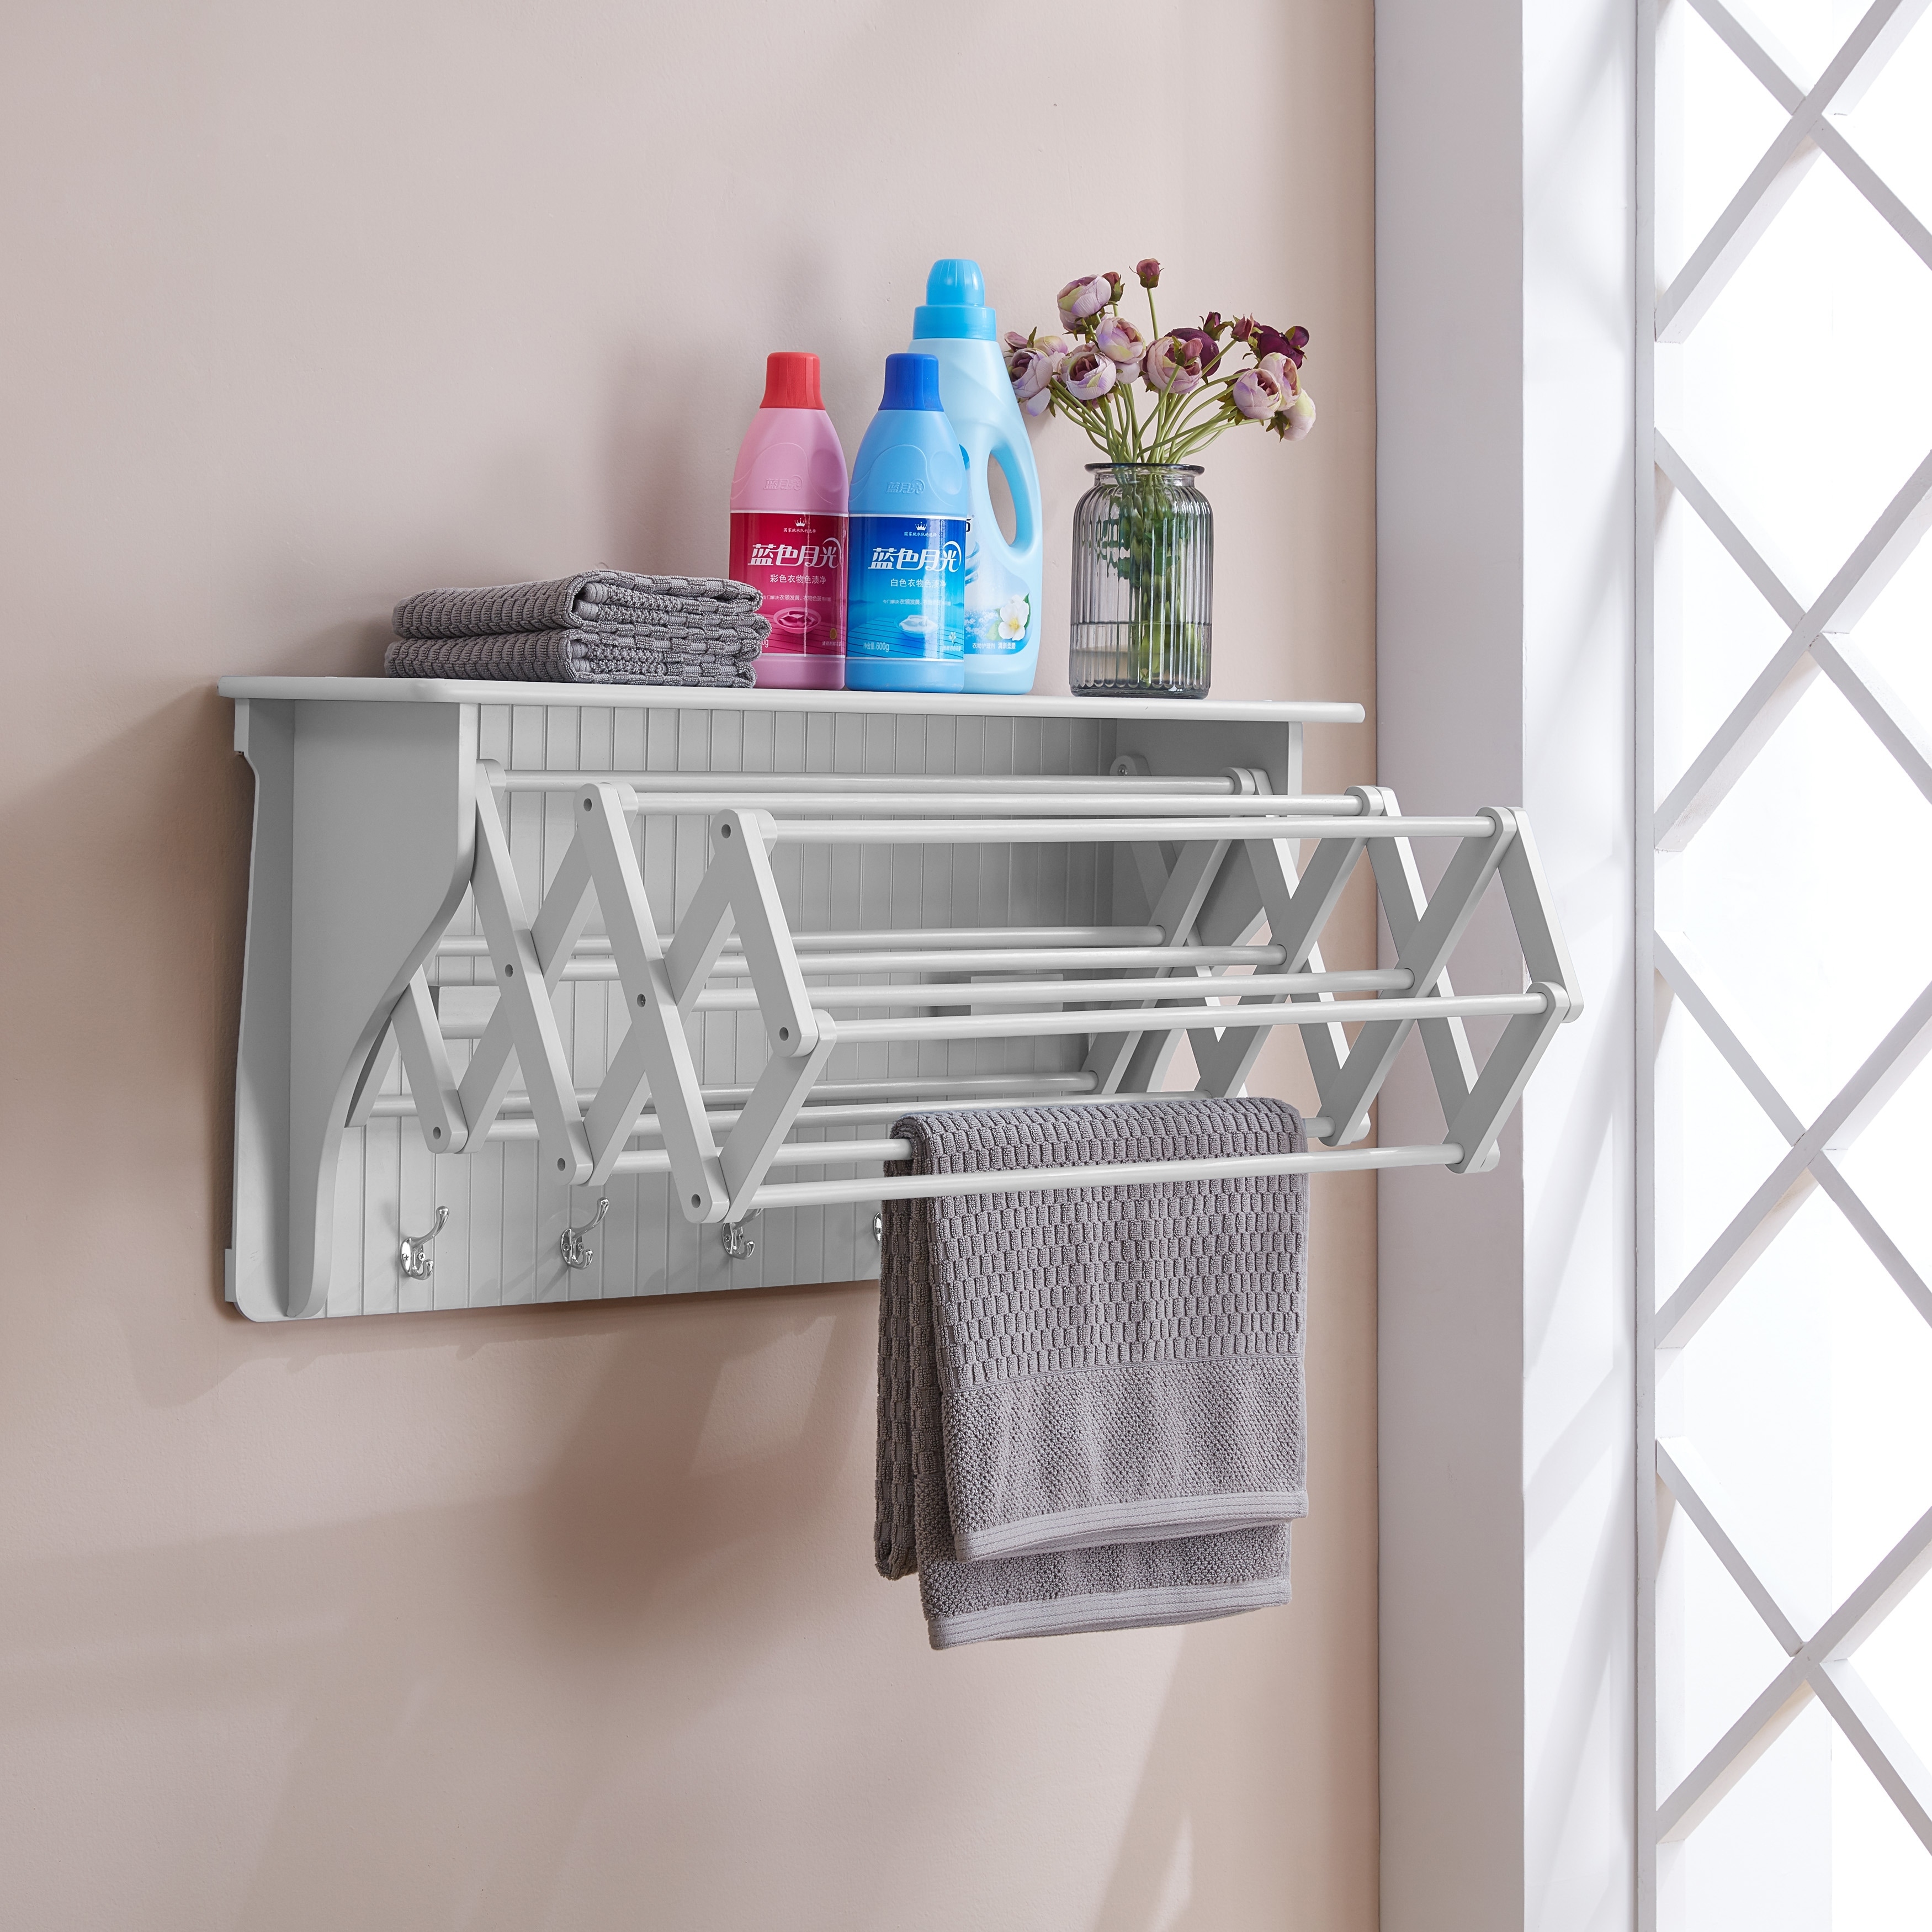 Multi Purpose Bath Curtain Rod Telescopic Clothes Drying Rack Drying Rod -  China Rod and Curtain Rod price